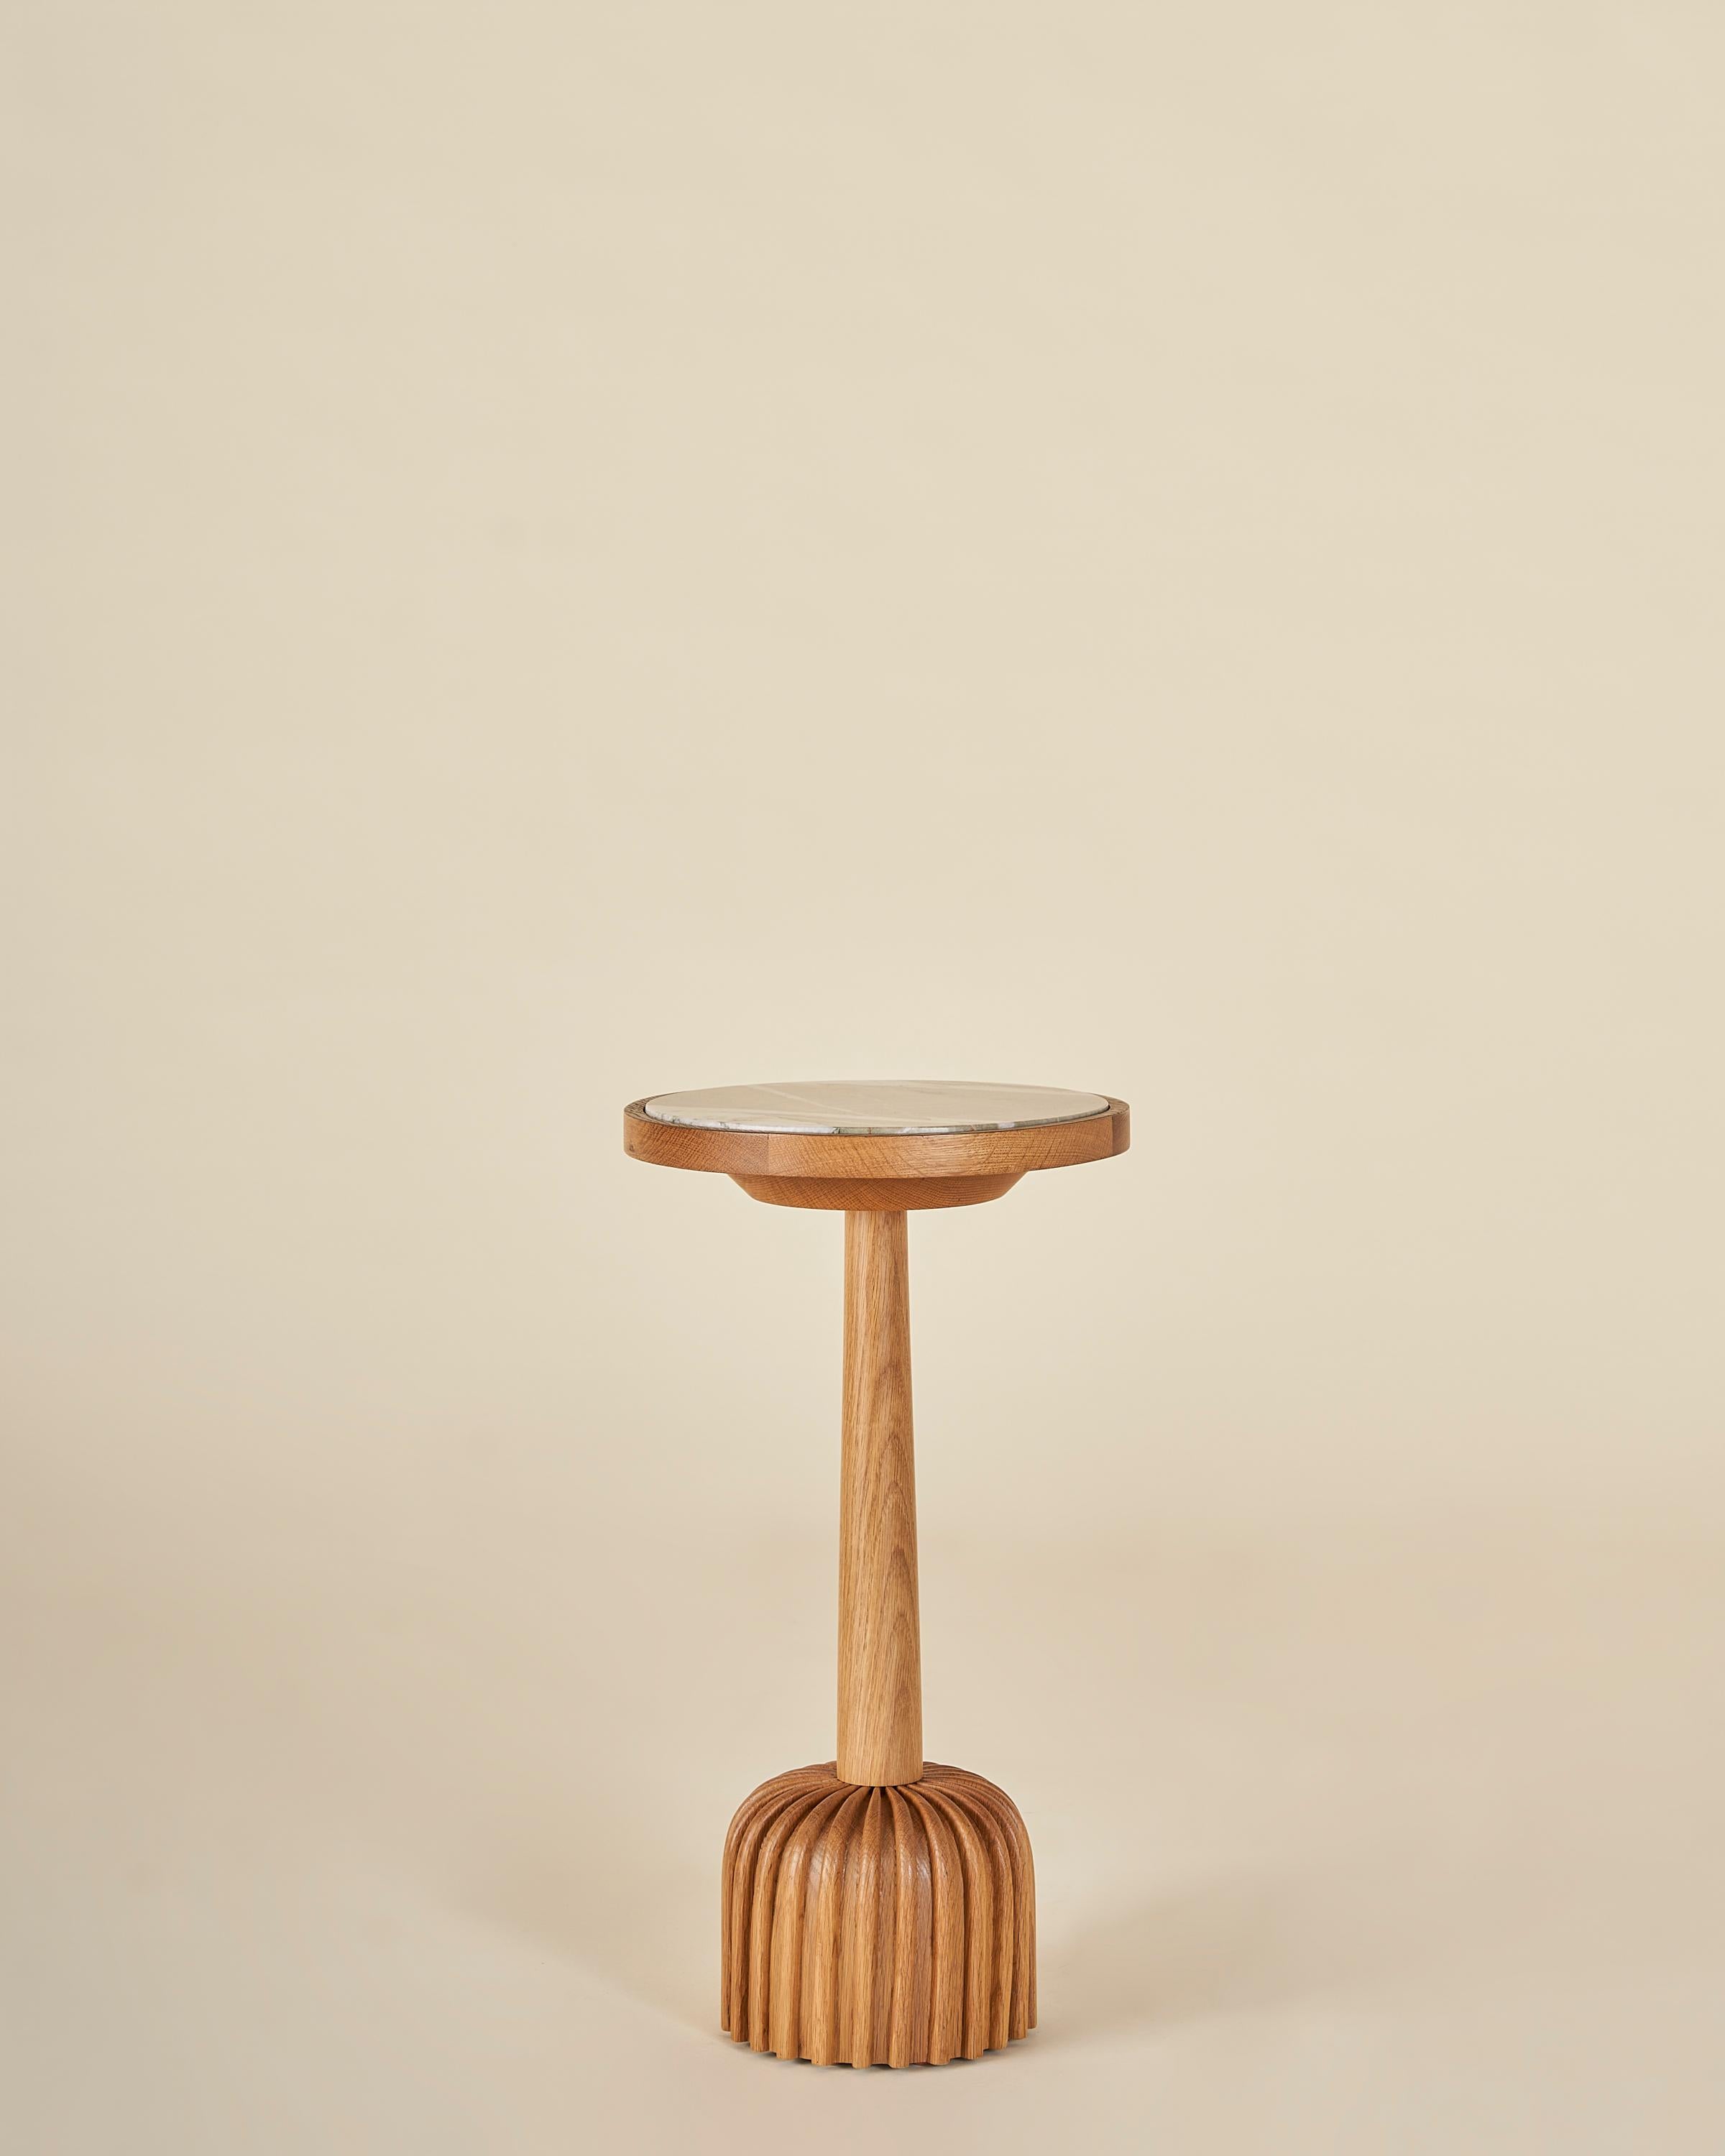 Form meets function with this classic cocktail table or side table. The piece features a specialized reeded solid oak base and an inset Fairy Verderra green marble top. The petite size allows for ease of movement around any room, though the marble